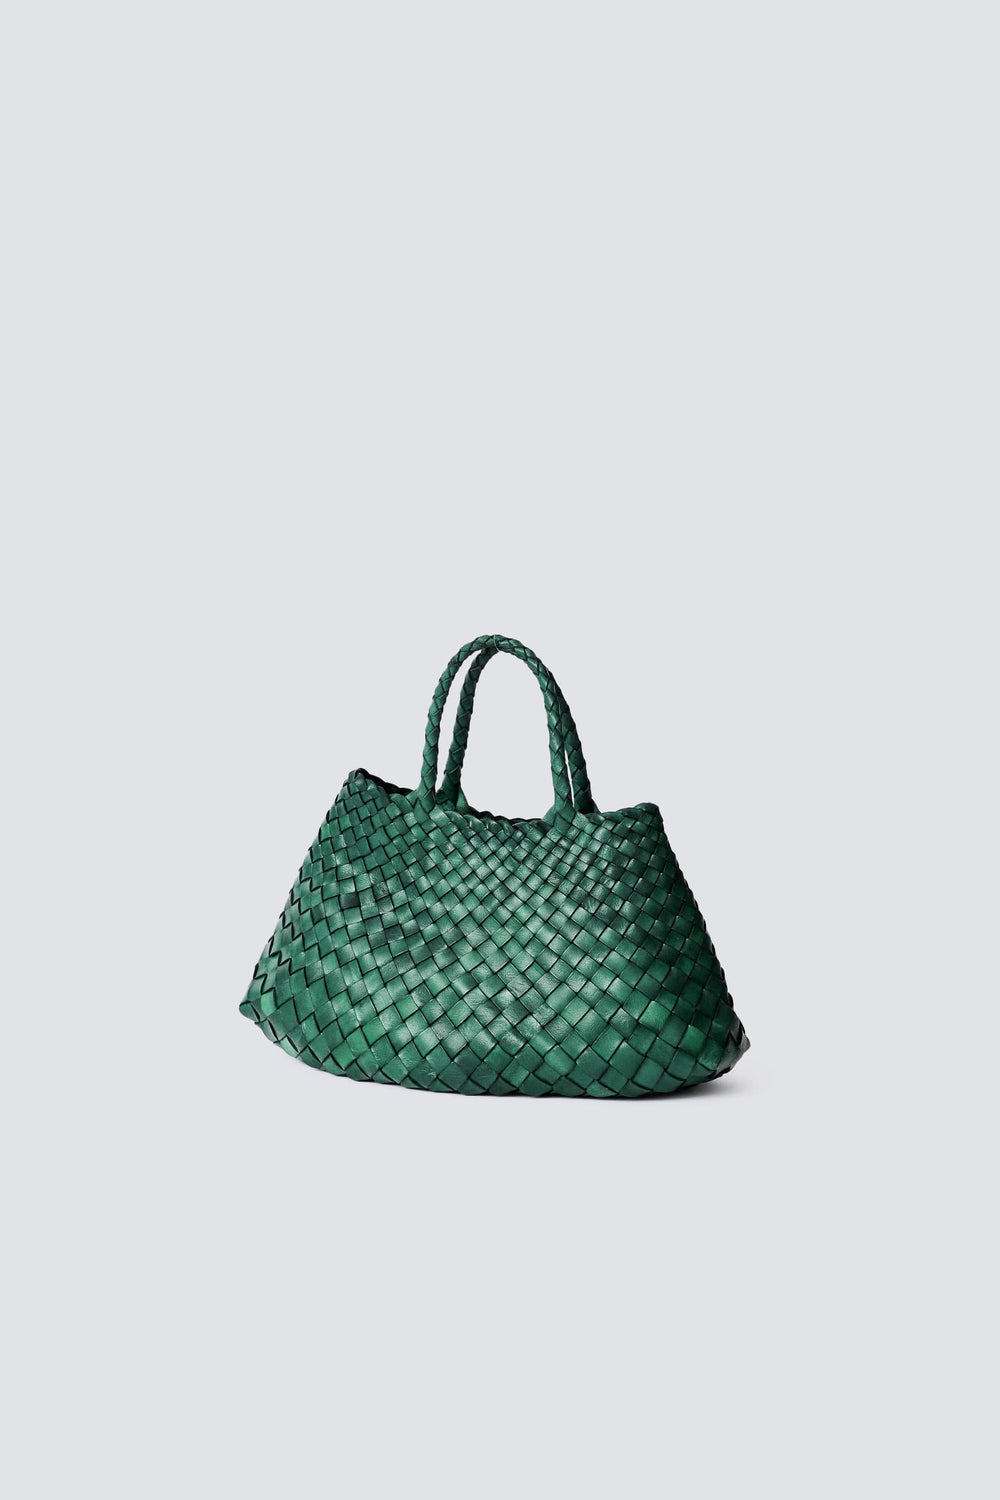 Dragon Diffusion woven leather bag handmade - Santa Croce Small Forest Green